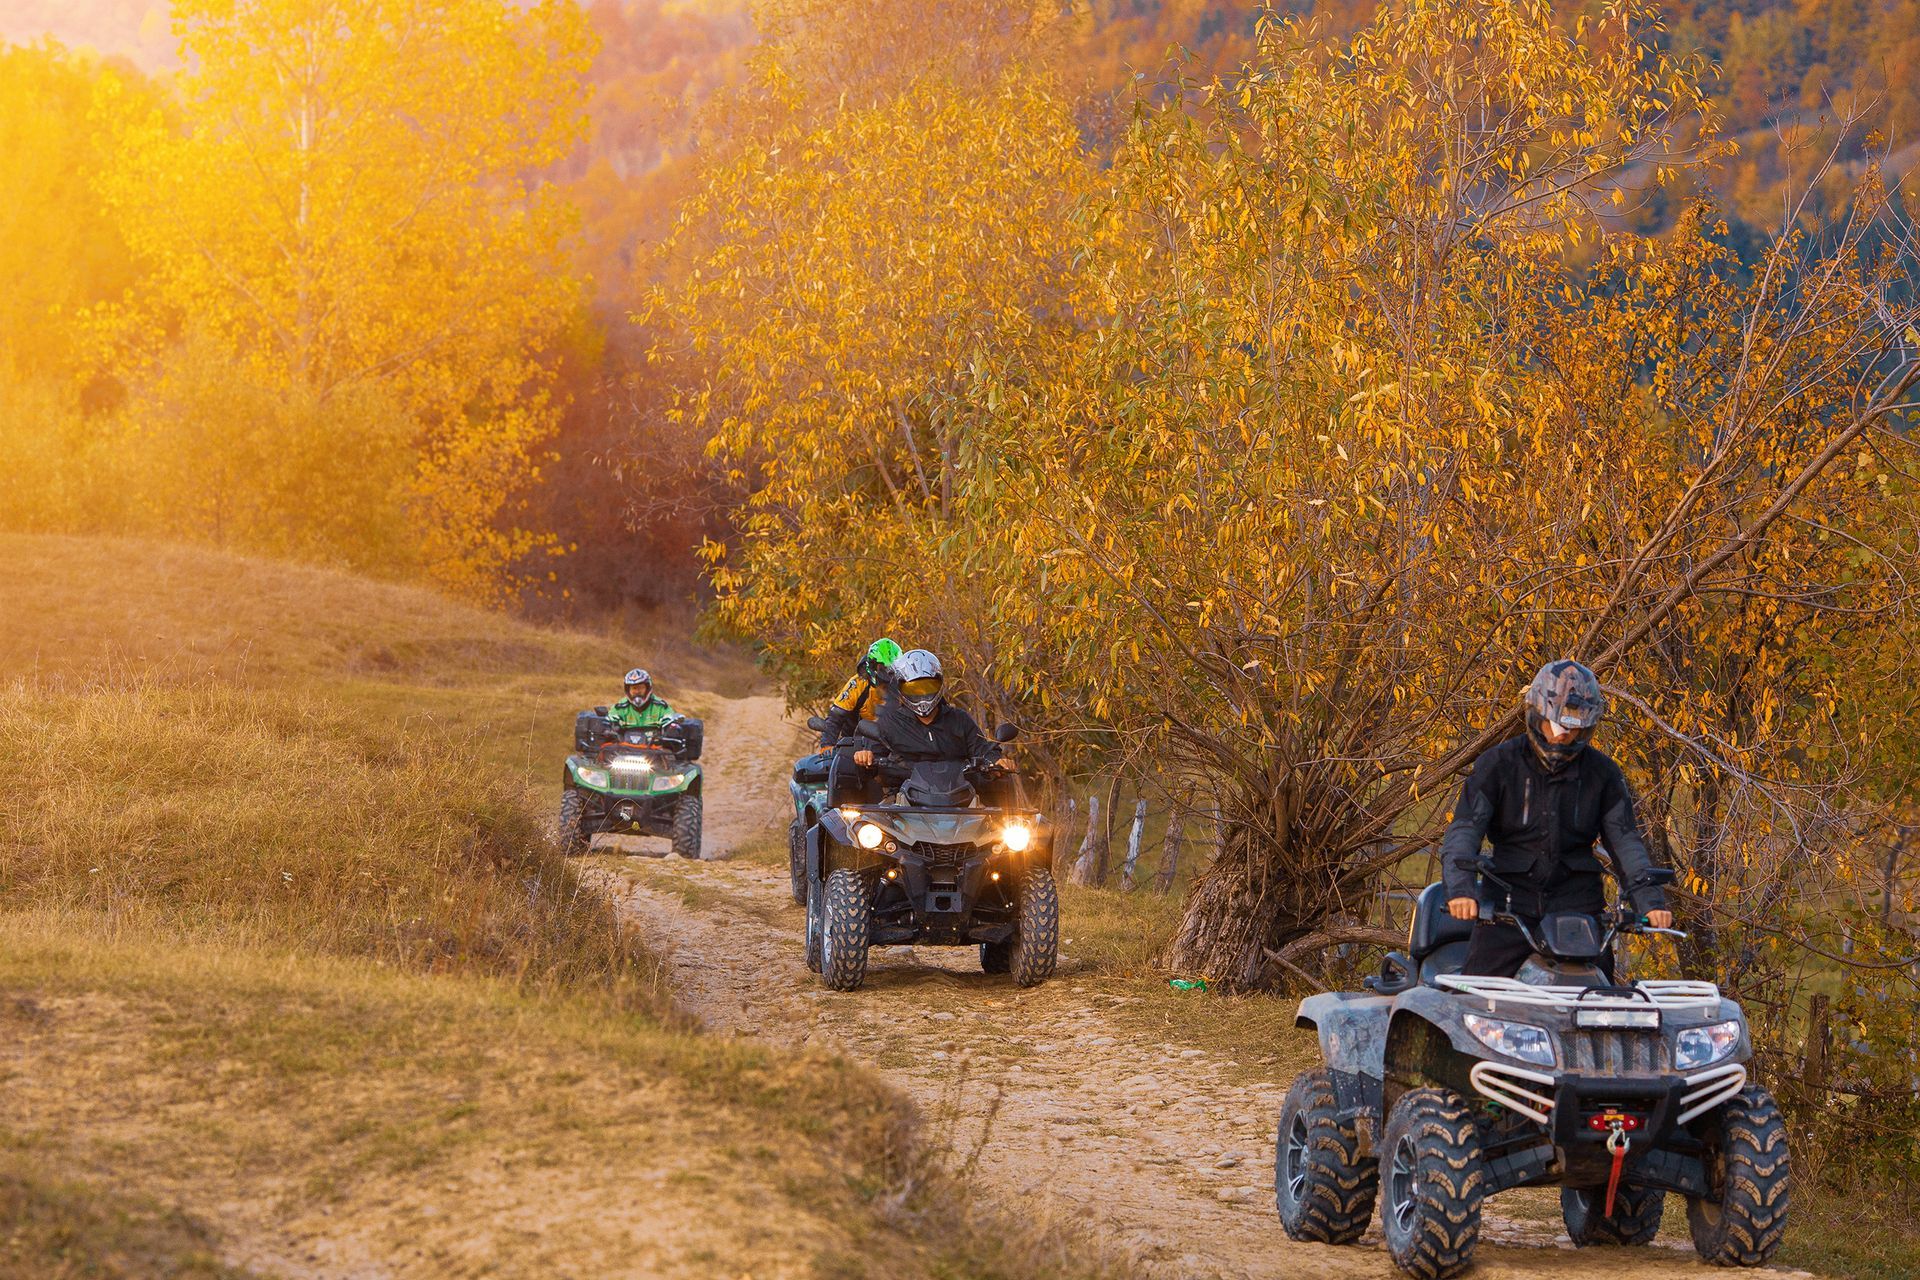 a group of people are riding atvs down a dirt road